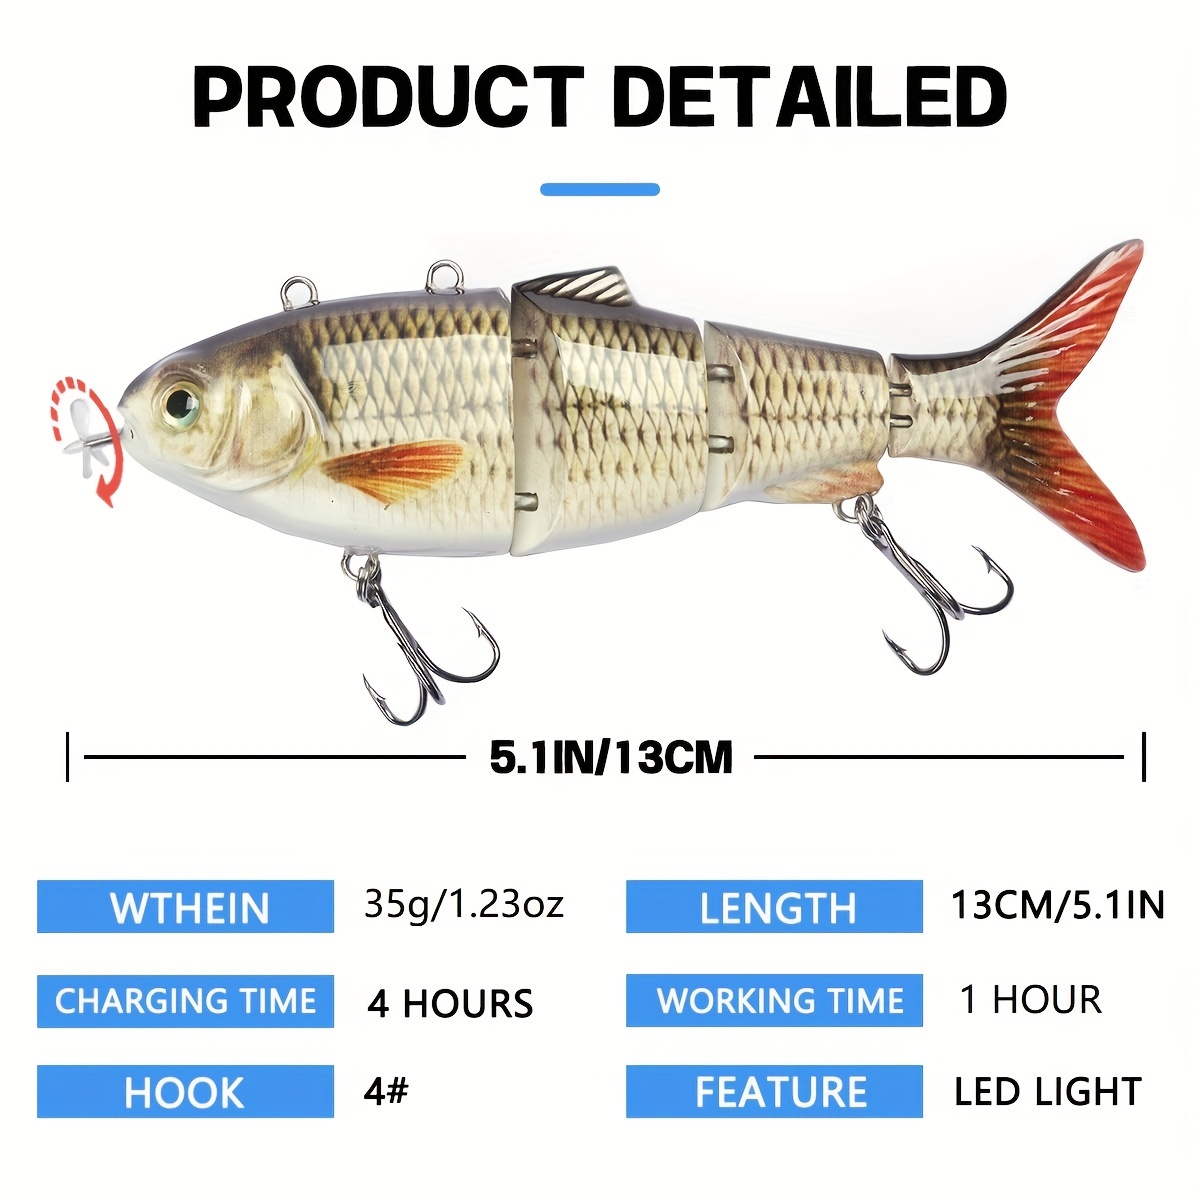 The Smartest Swimbait & Hook System - Fishing Tackle Retailer